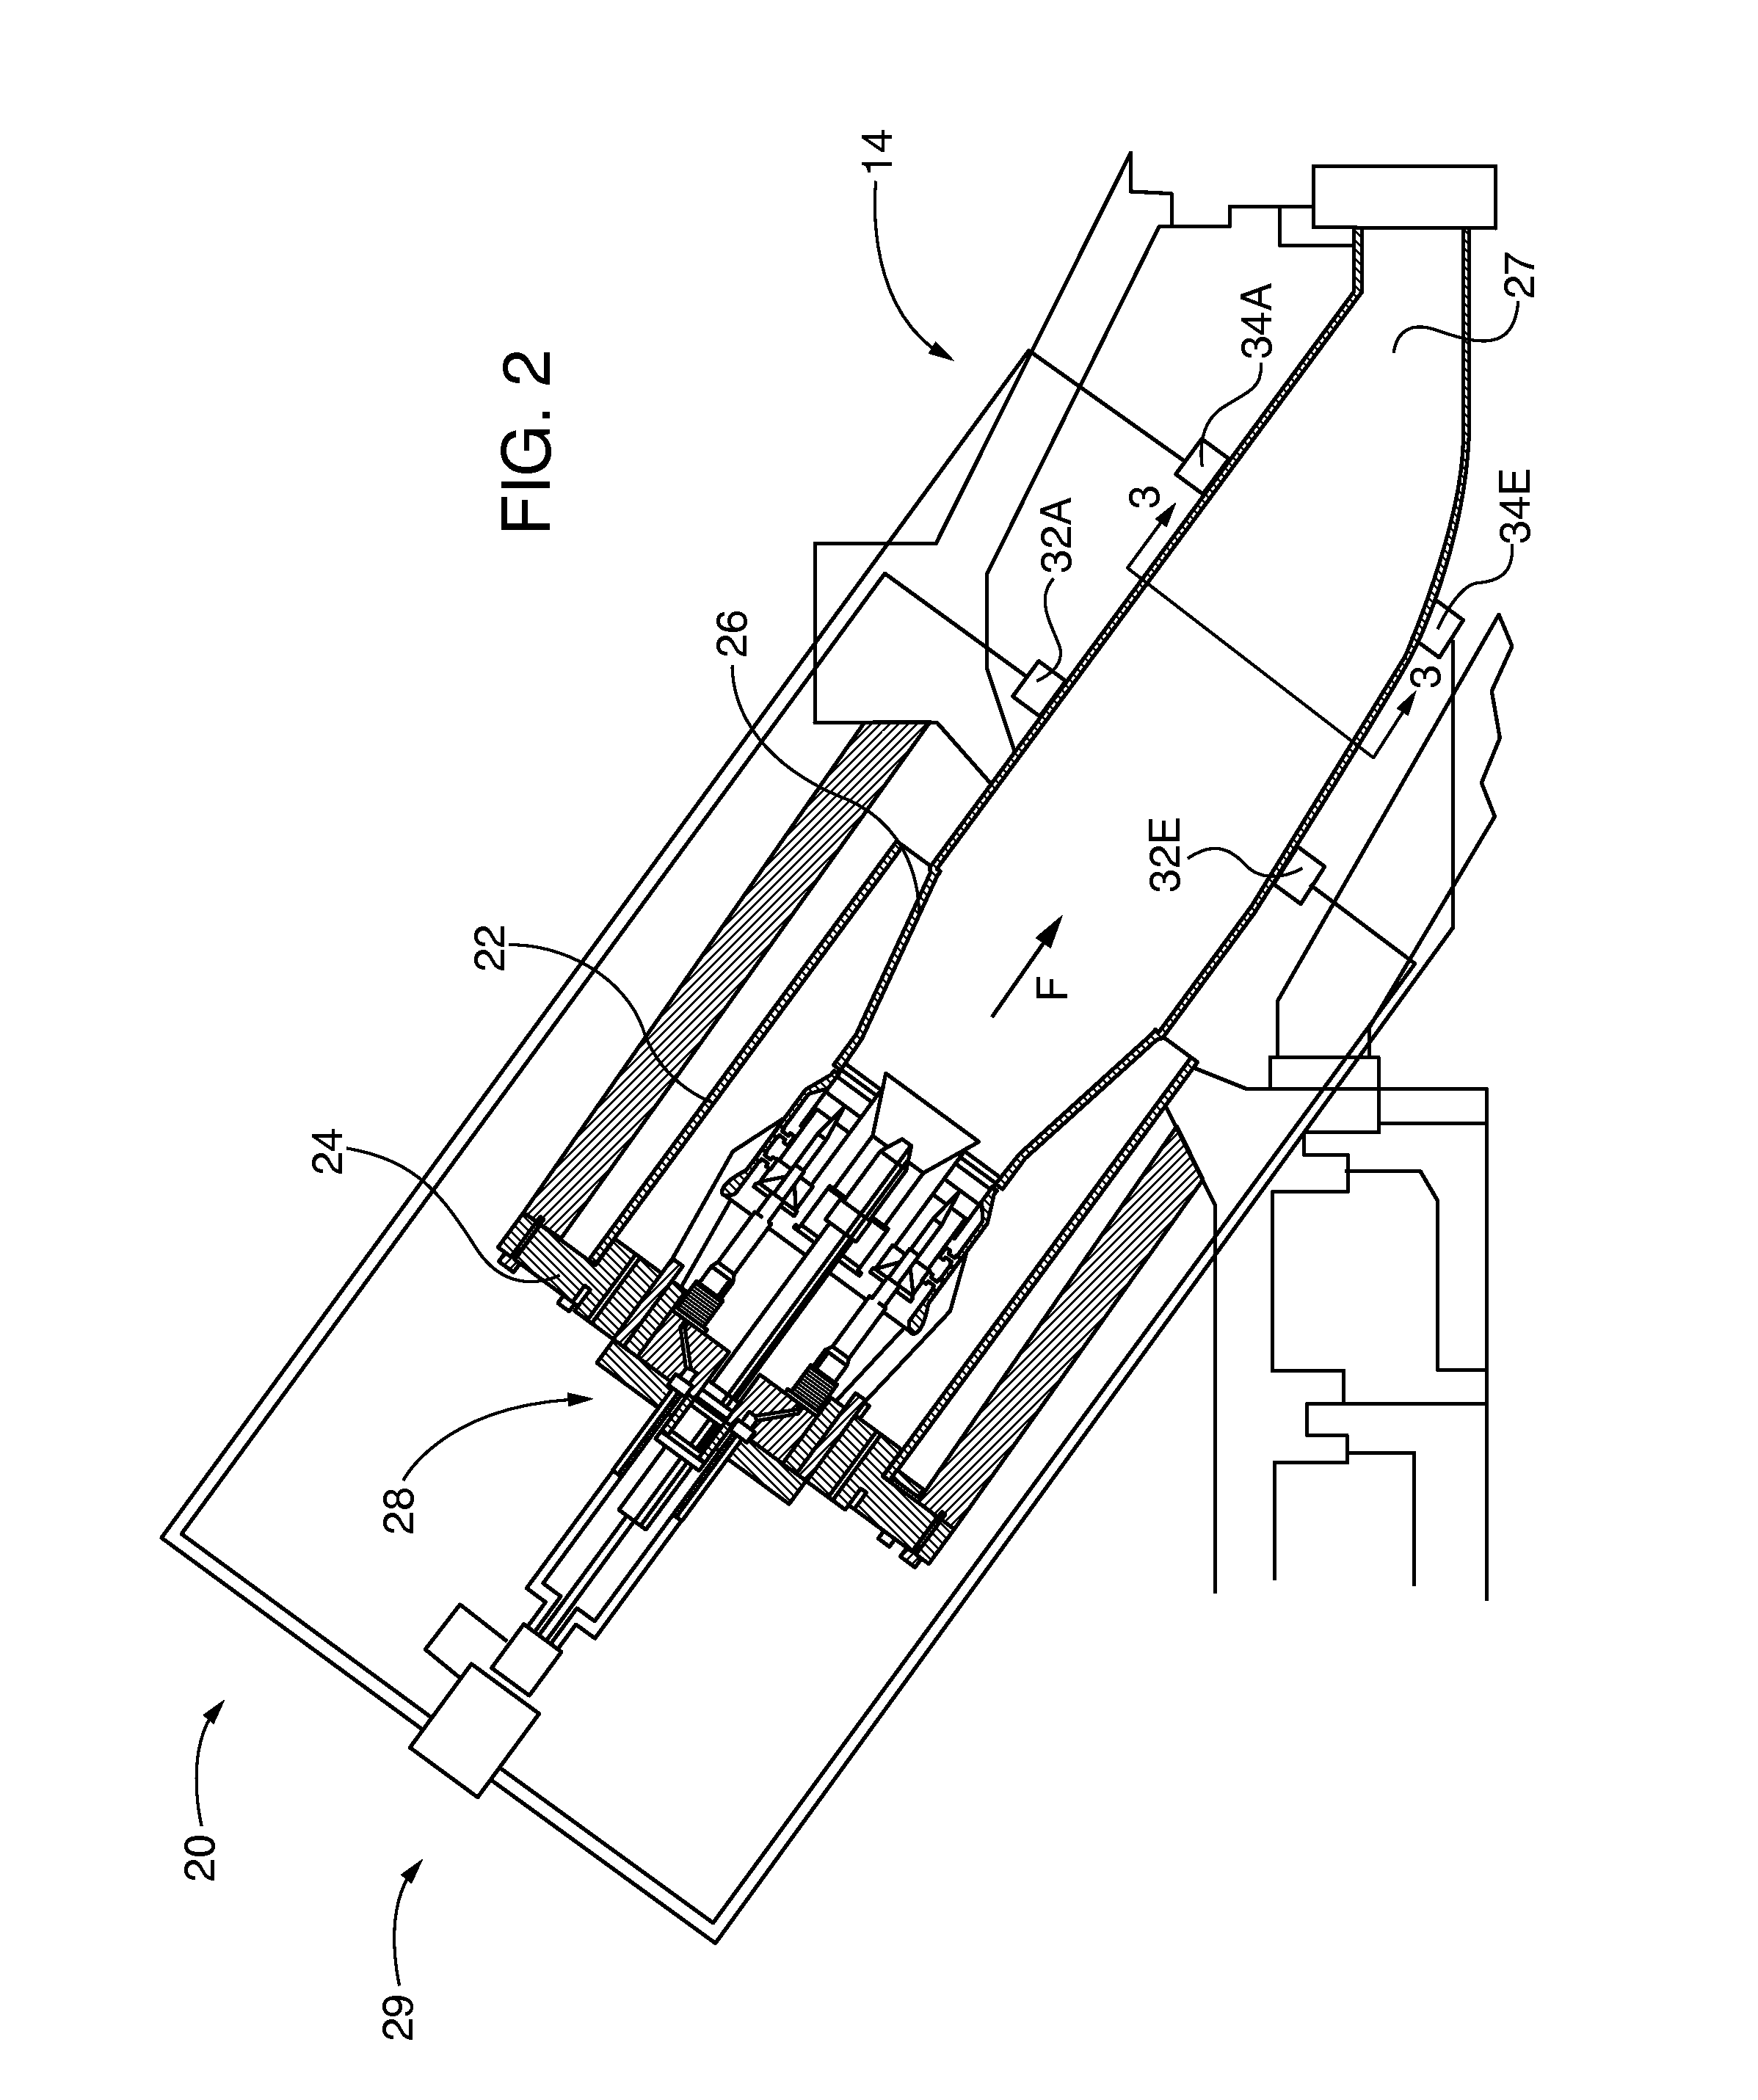 Parameter distribution mapping in a gas turbine engine